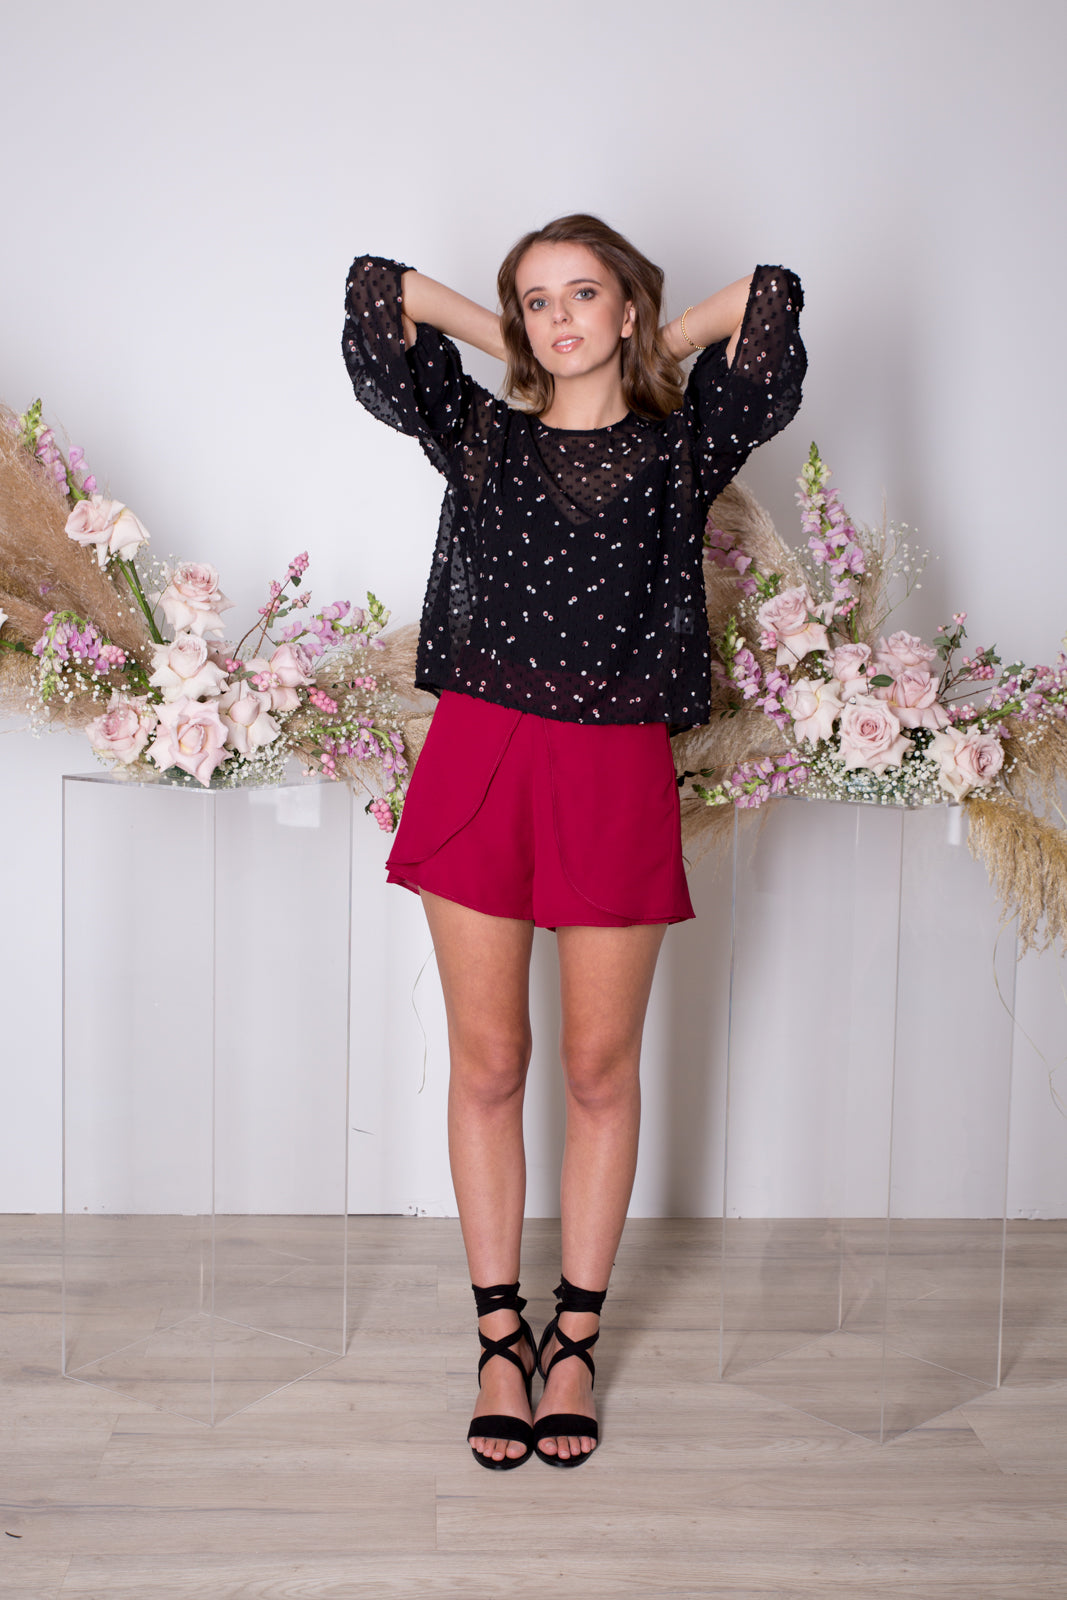 Black forest Top (Second hand)